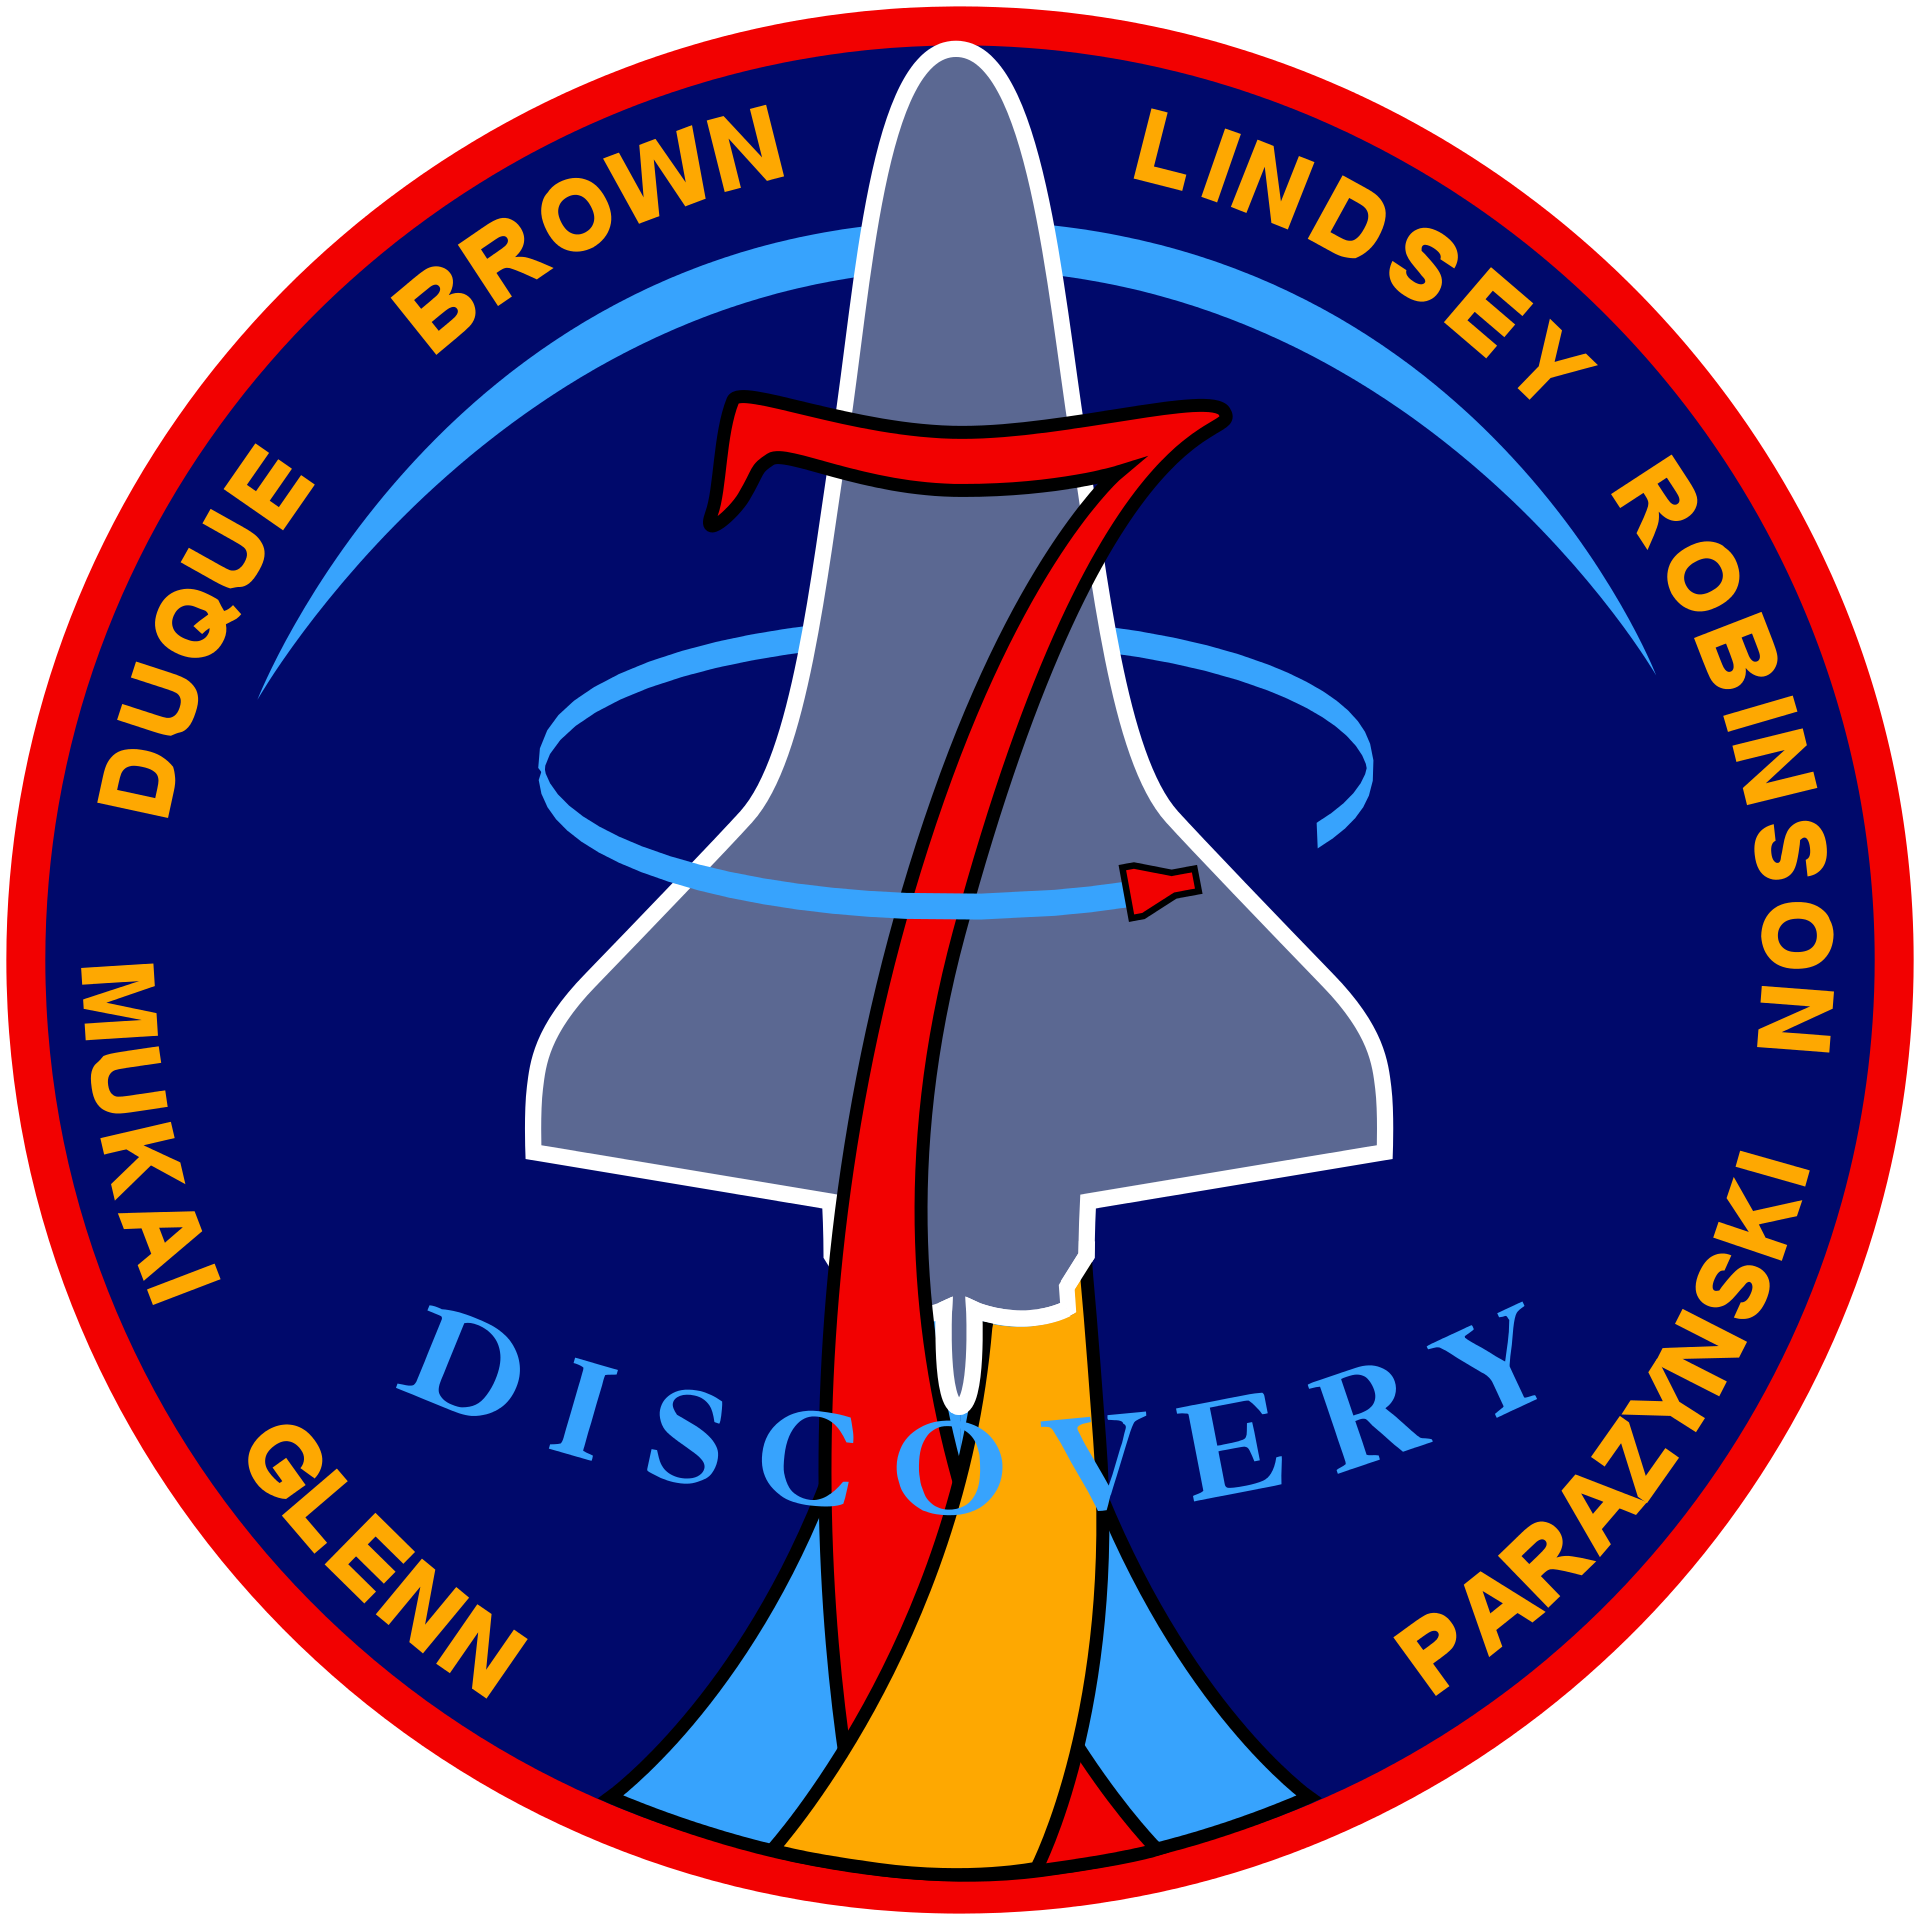 Mission patch for STS-95